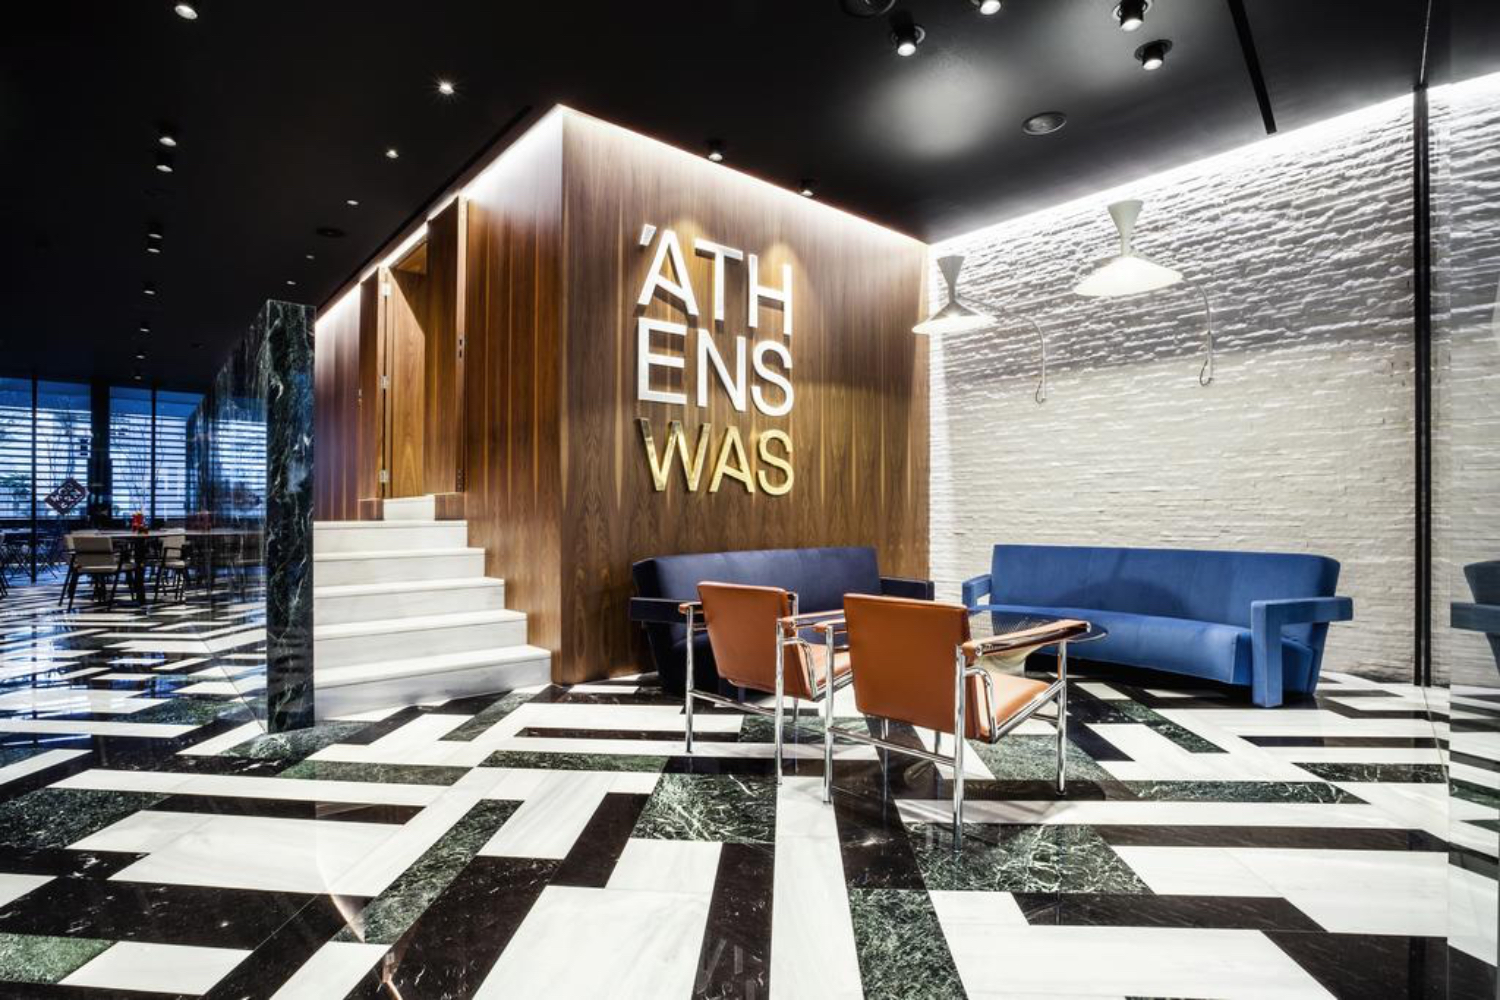  Hip and beautiful hotel in Athens – AthensWAS